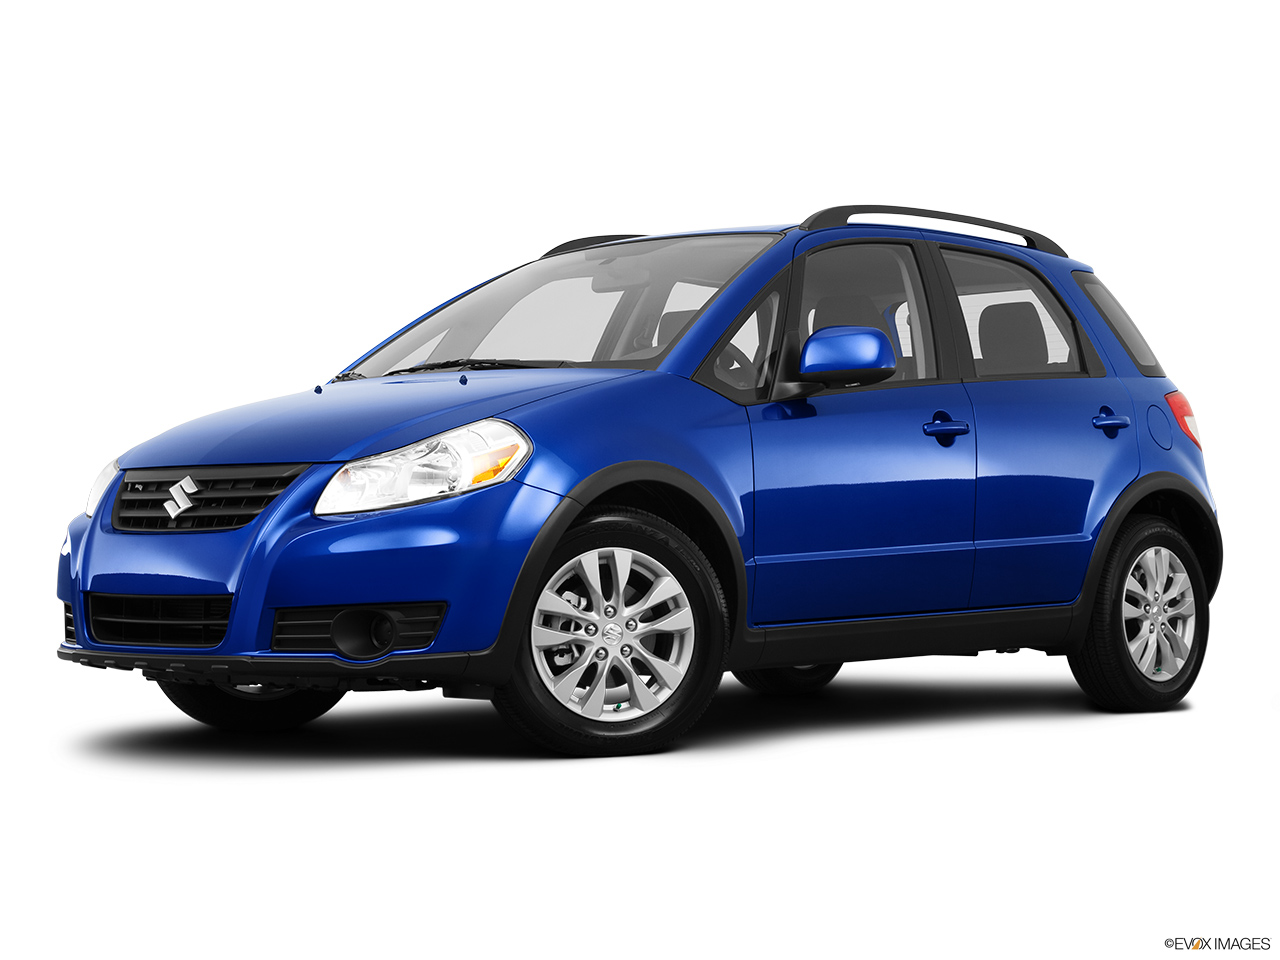 2013 Suzuki SX4 AWD Crossover Premium AT AWD Low/wide front 5/8. 